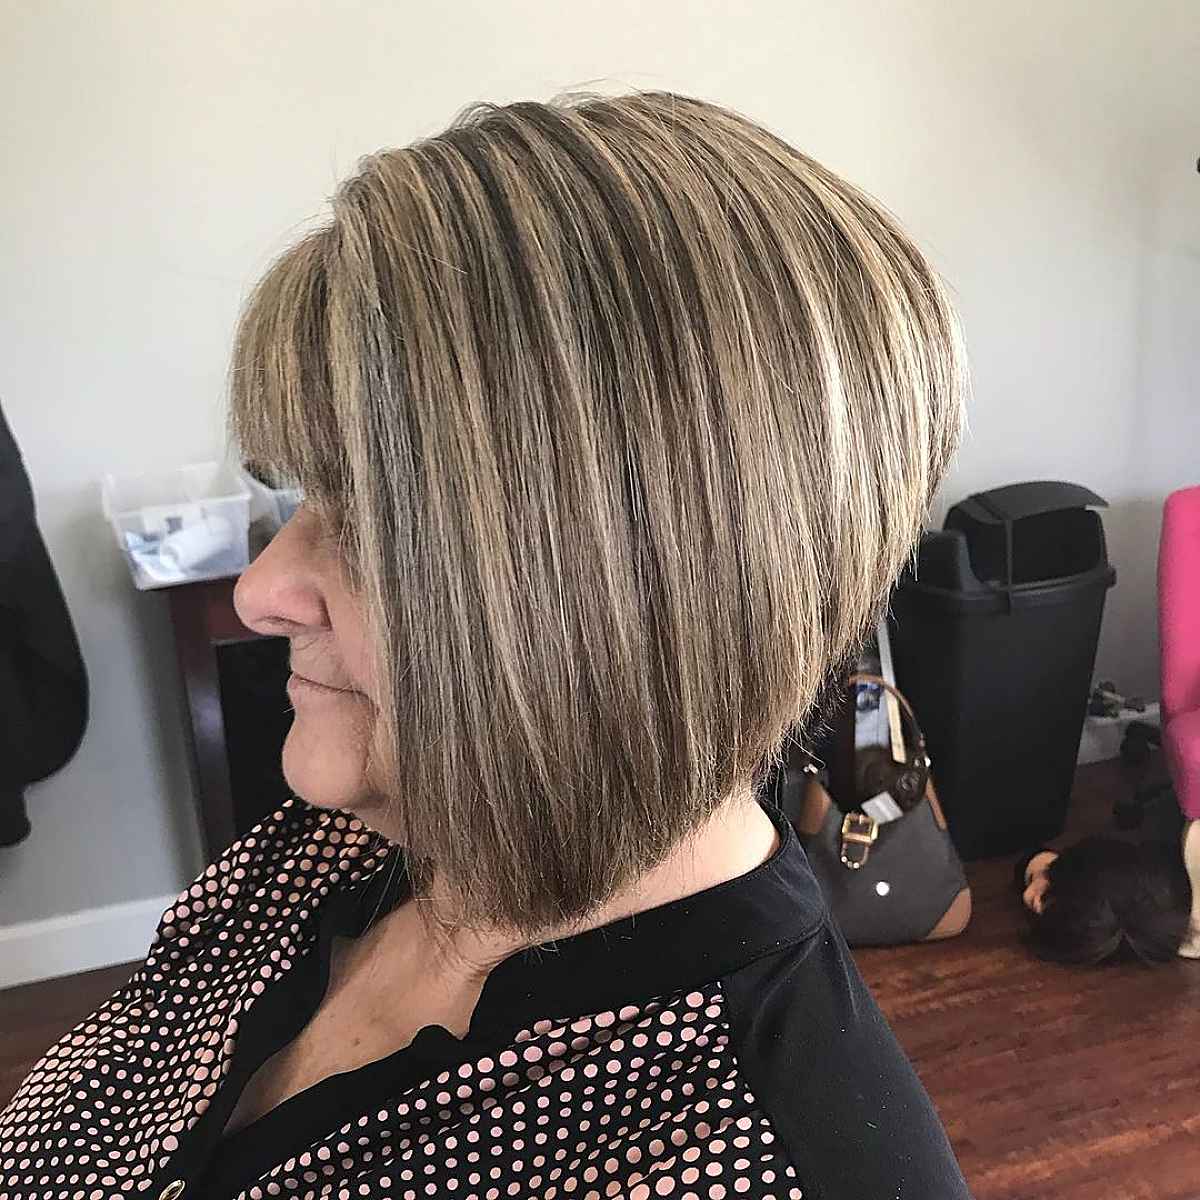 15 Stylish &#038; Easy Medium-Length Hairstyles for Ladies in Their 60s